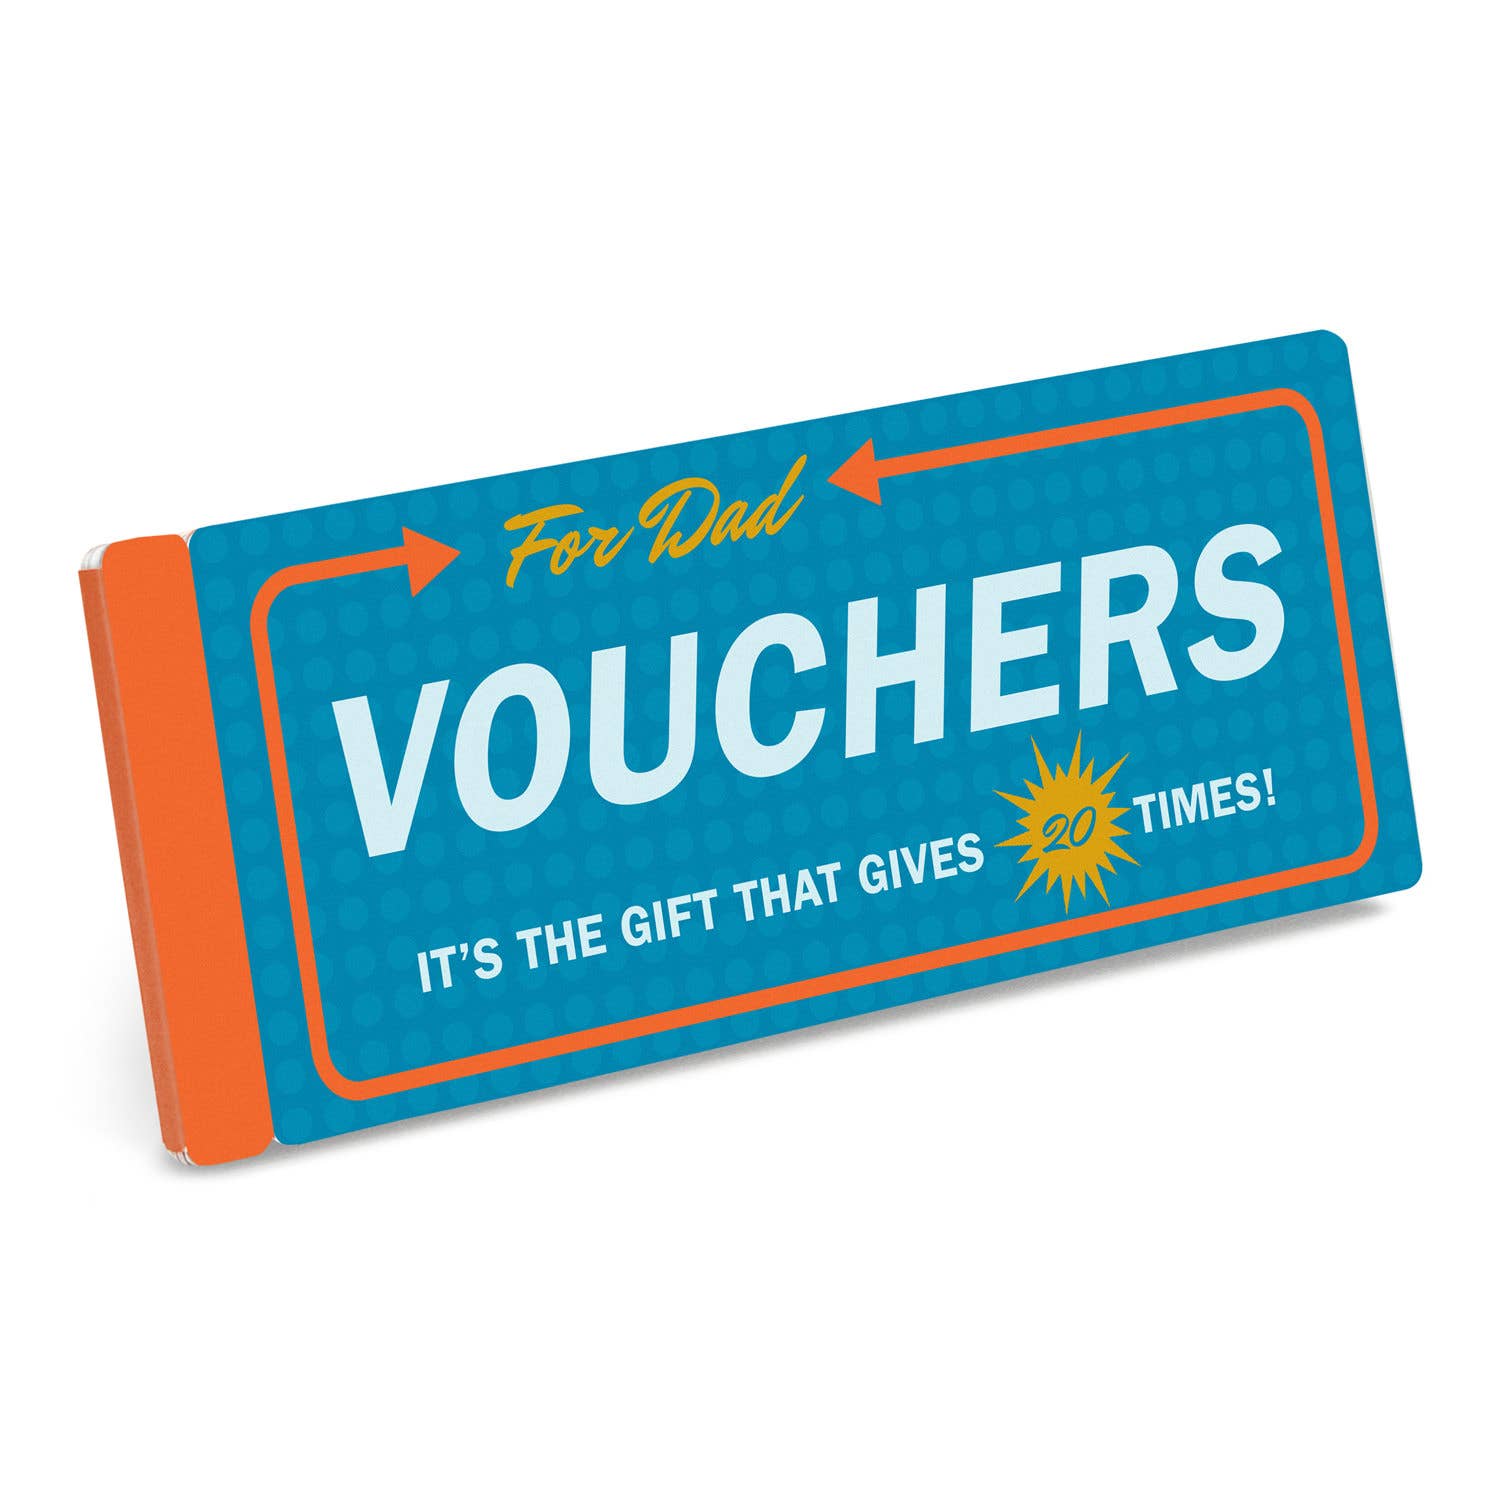 Vouchers for Dad - Knock Knock